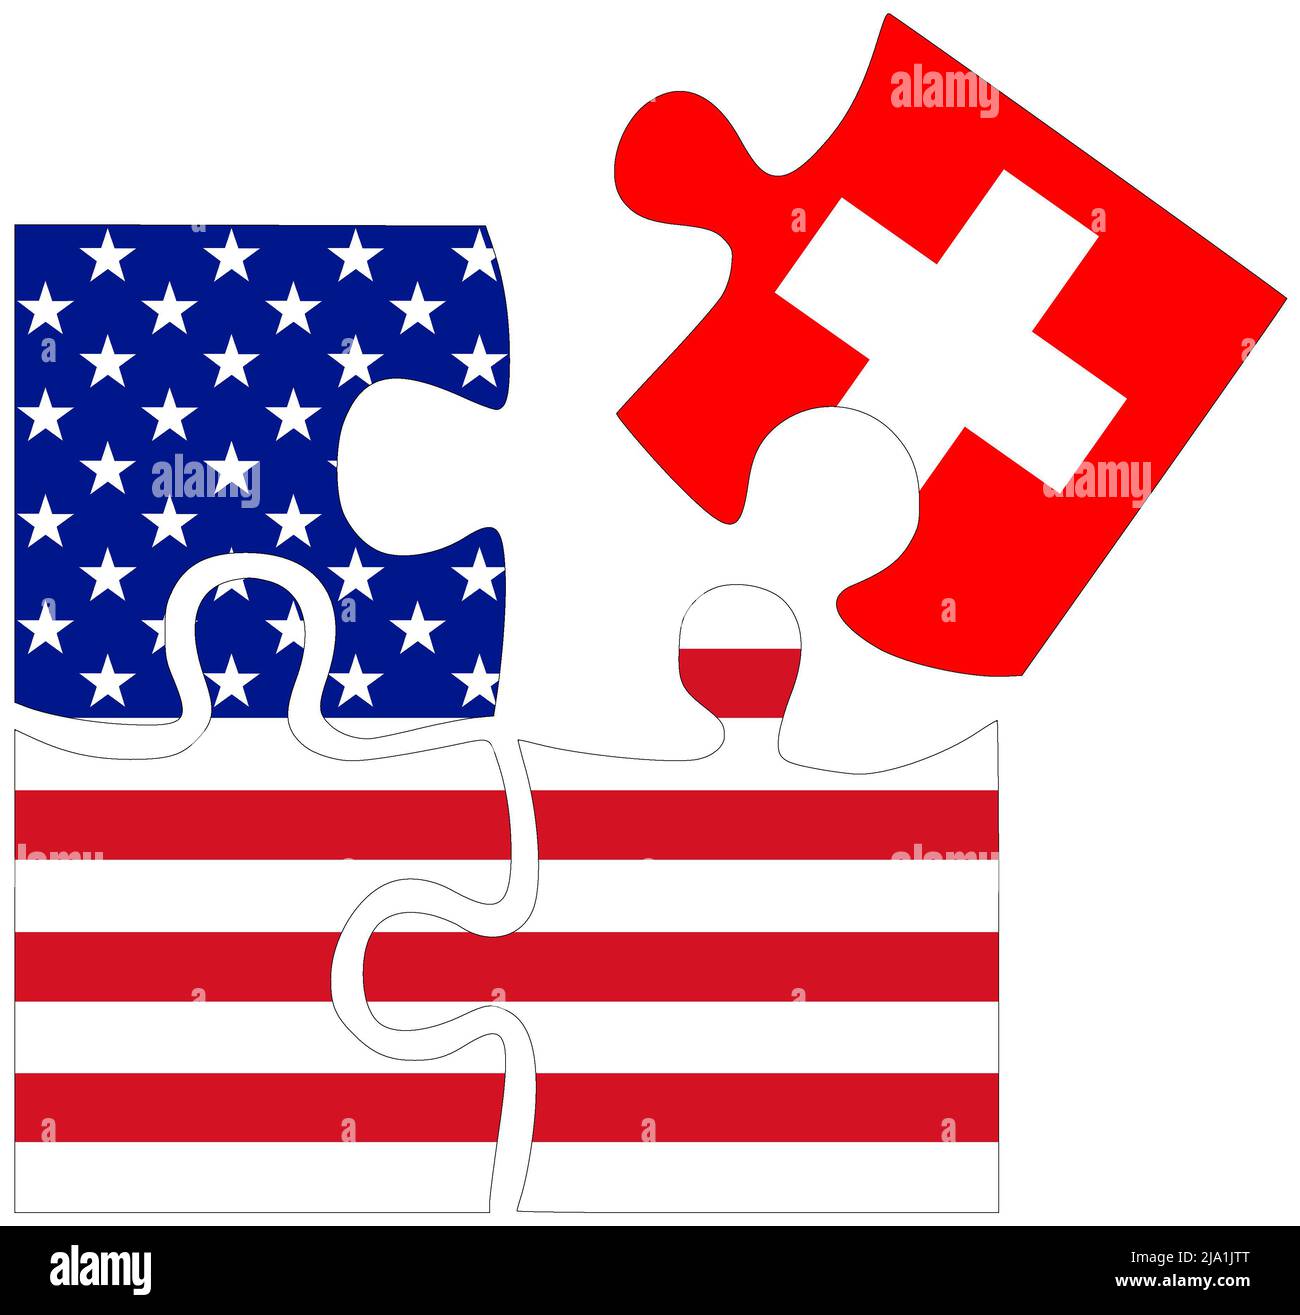 USA - Switzerland : puzzle shapes with flags, symbol of agreement or friendship Stock Photo